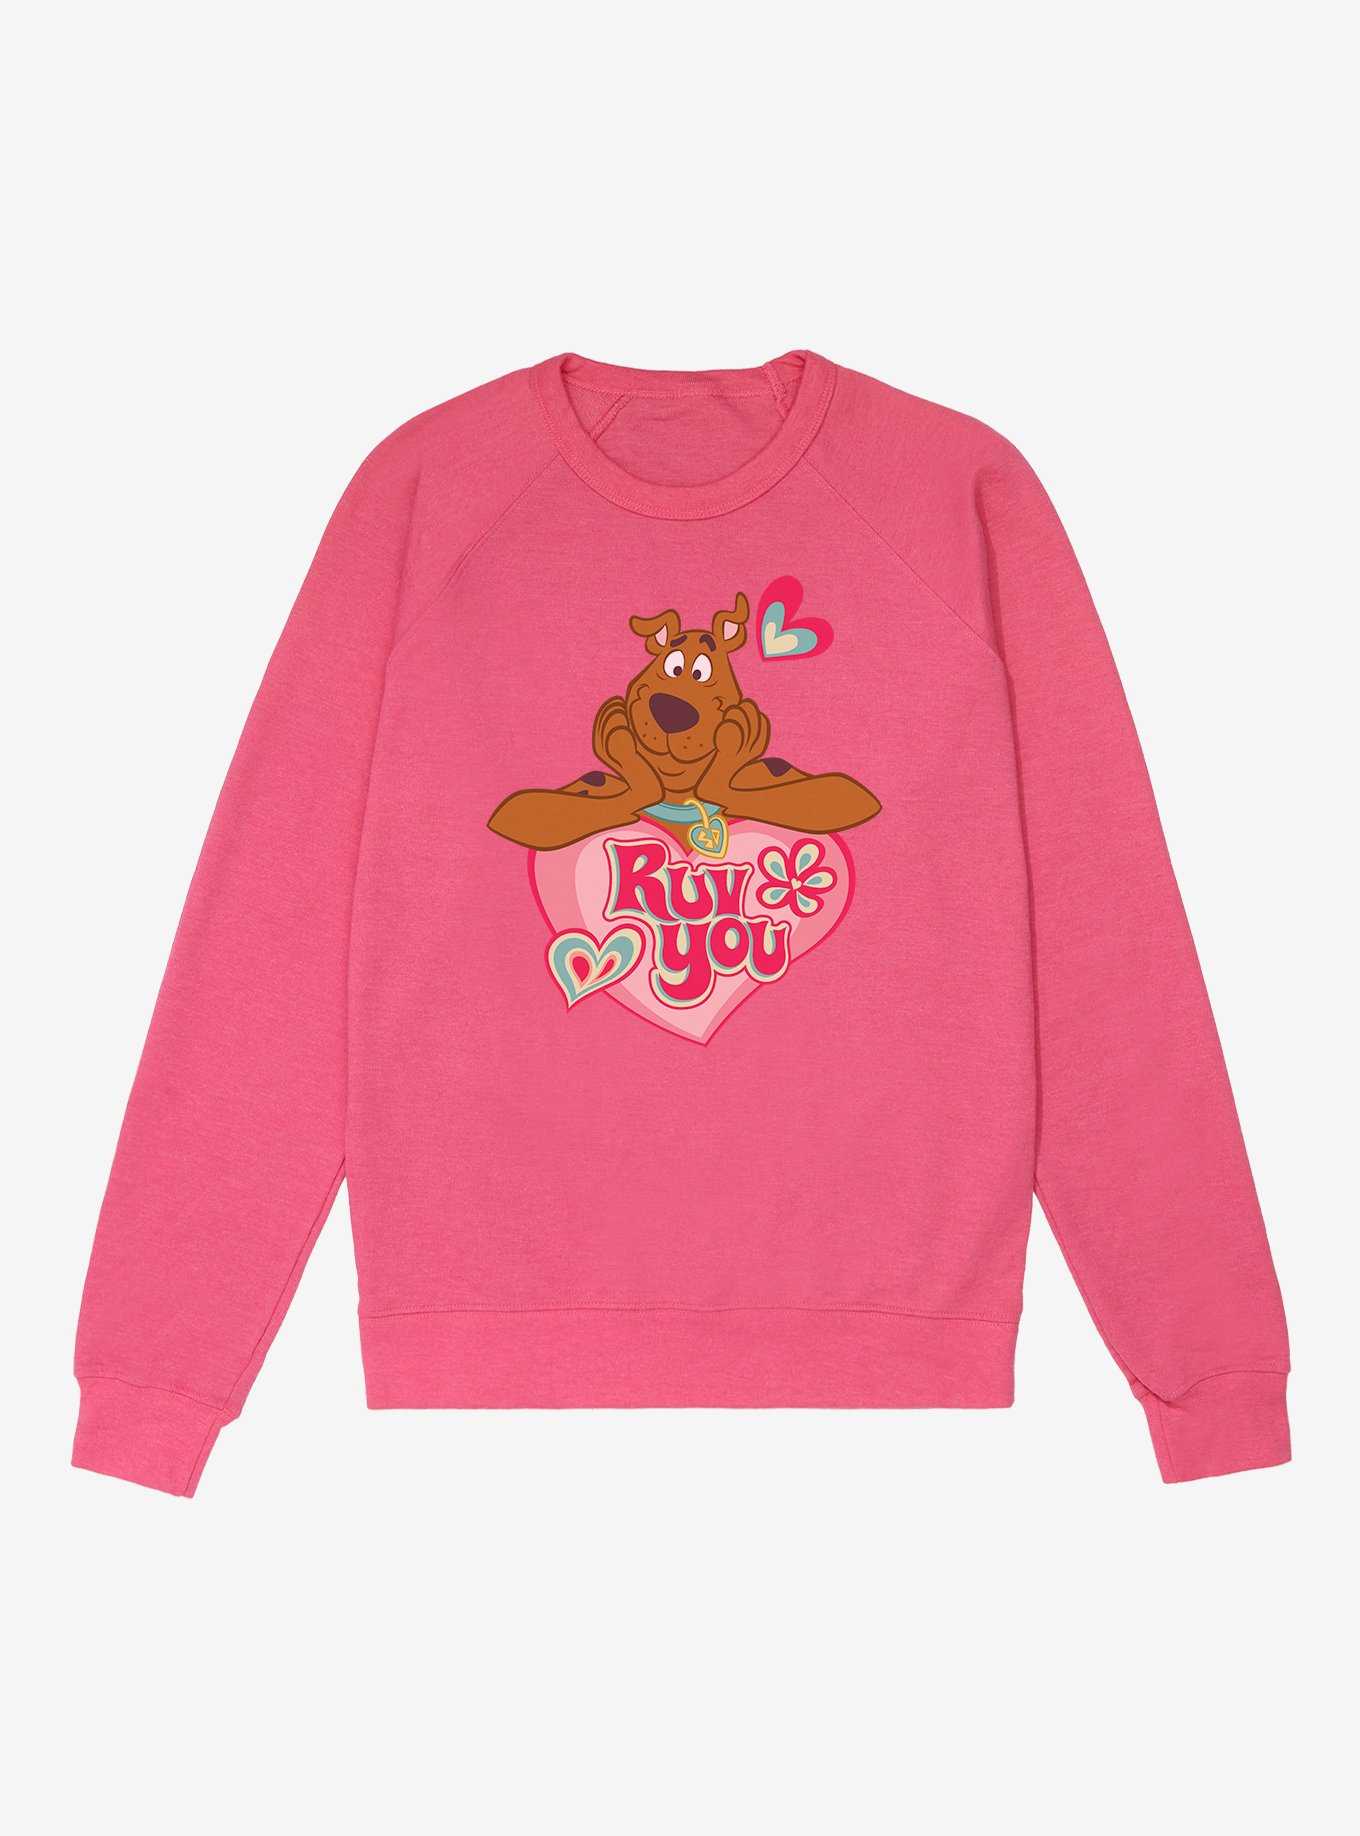 OFFICIAL Scooby-Doo Hoodies & Sweaters BoxLunch Gifts 